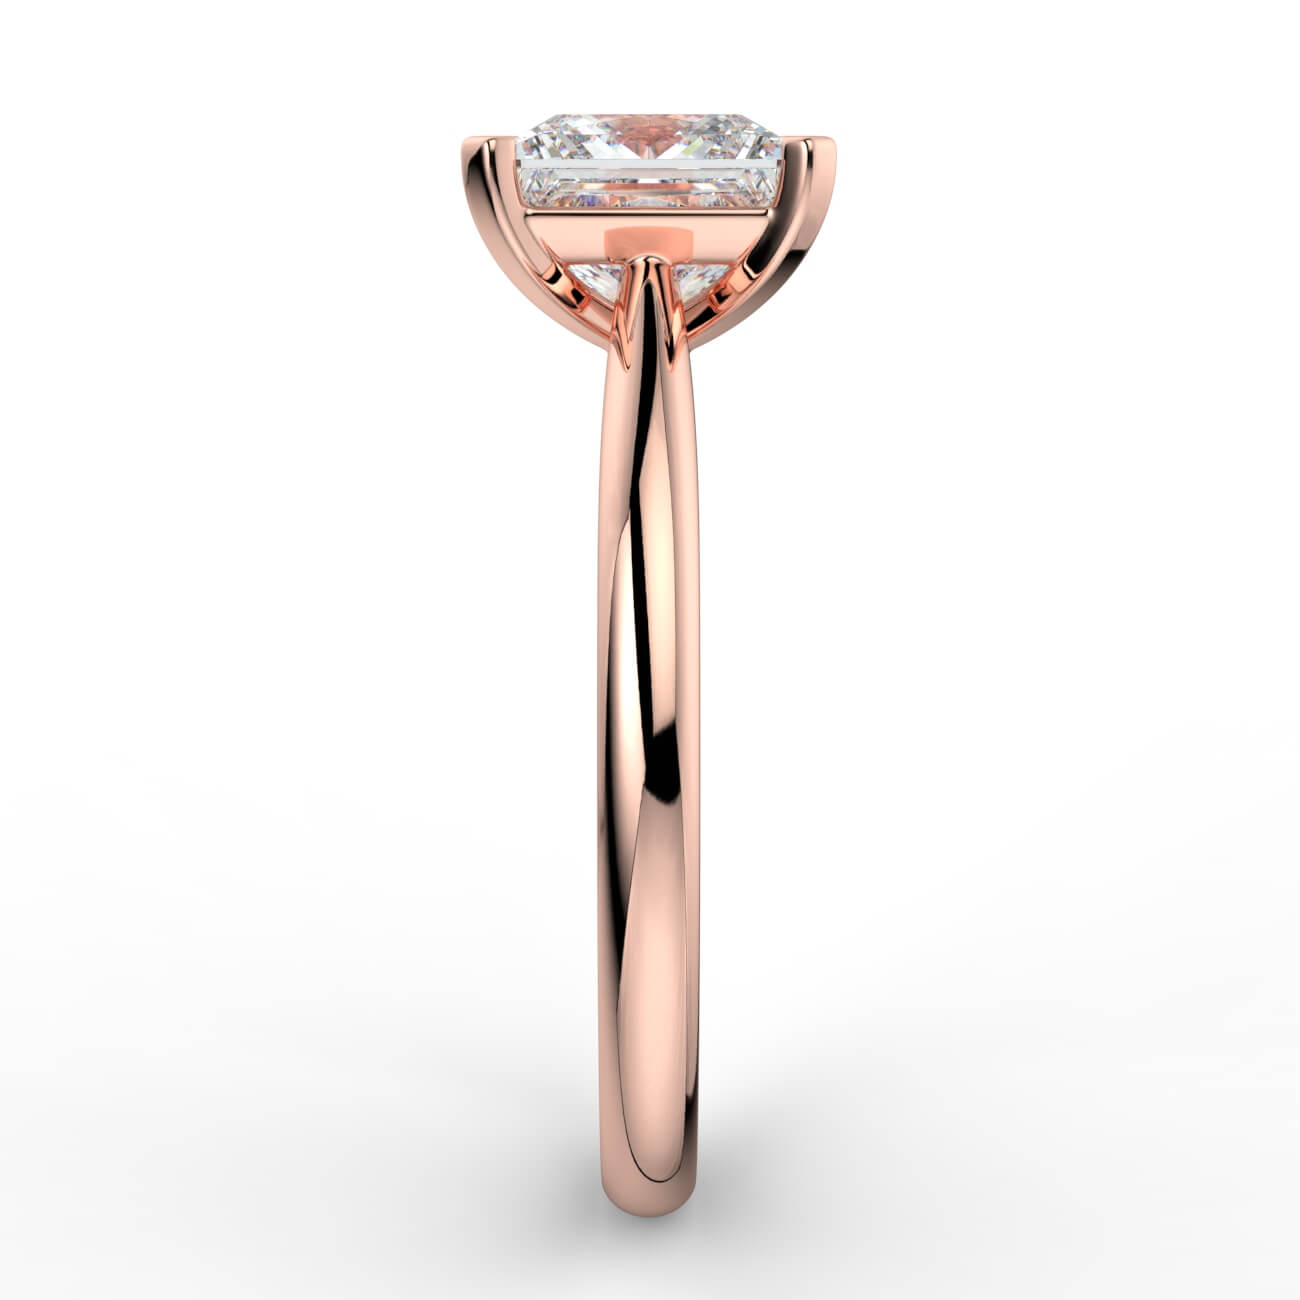 Princess cut diamond cathedral engagement ring in rose gold – Australian Diamond Network